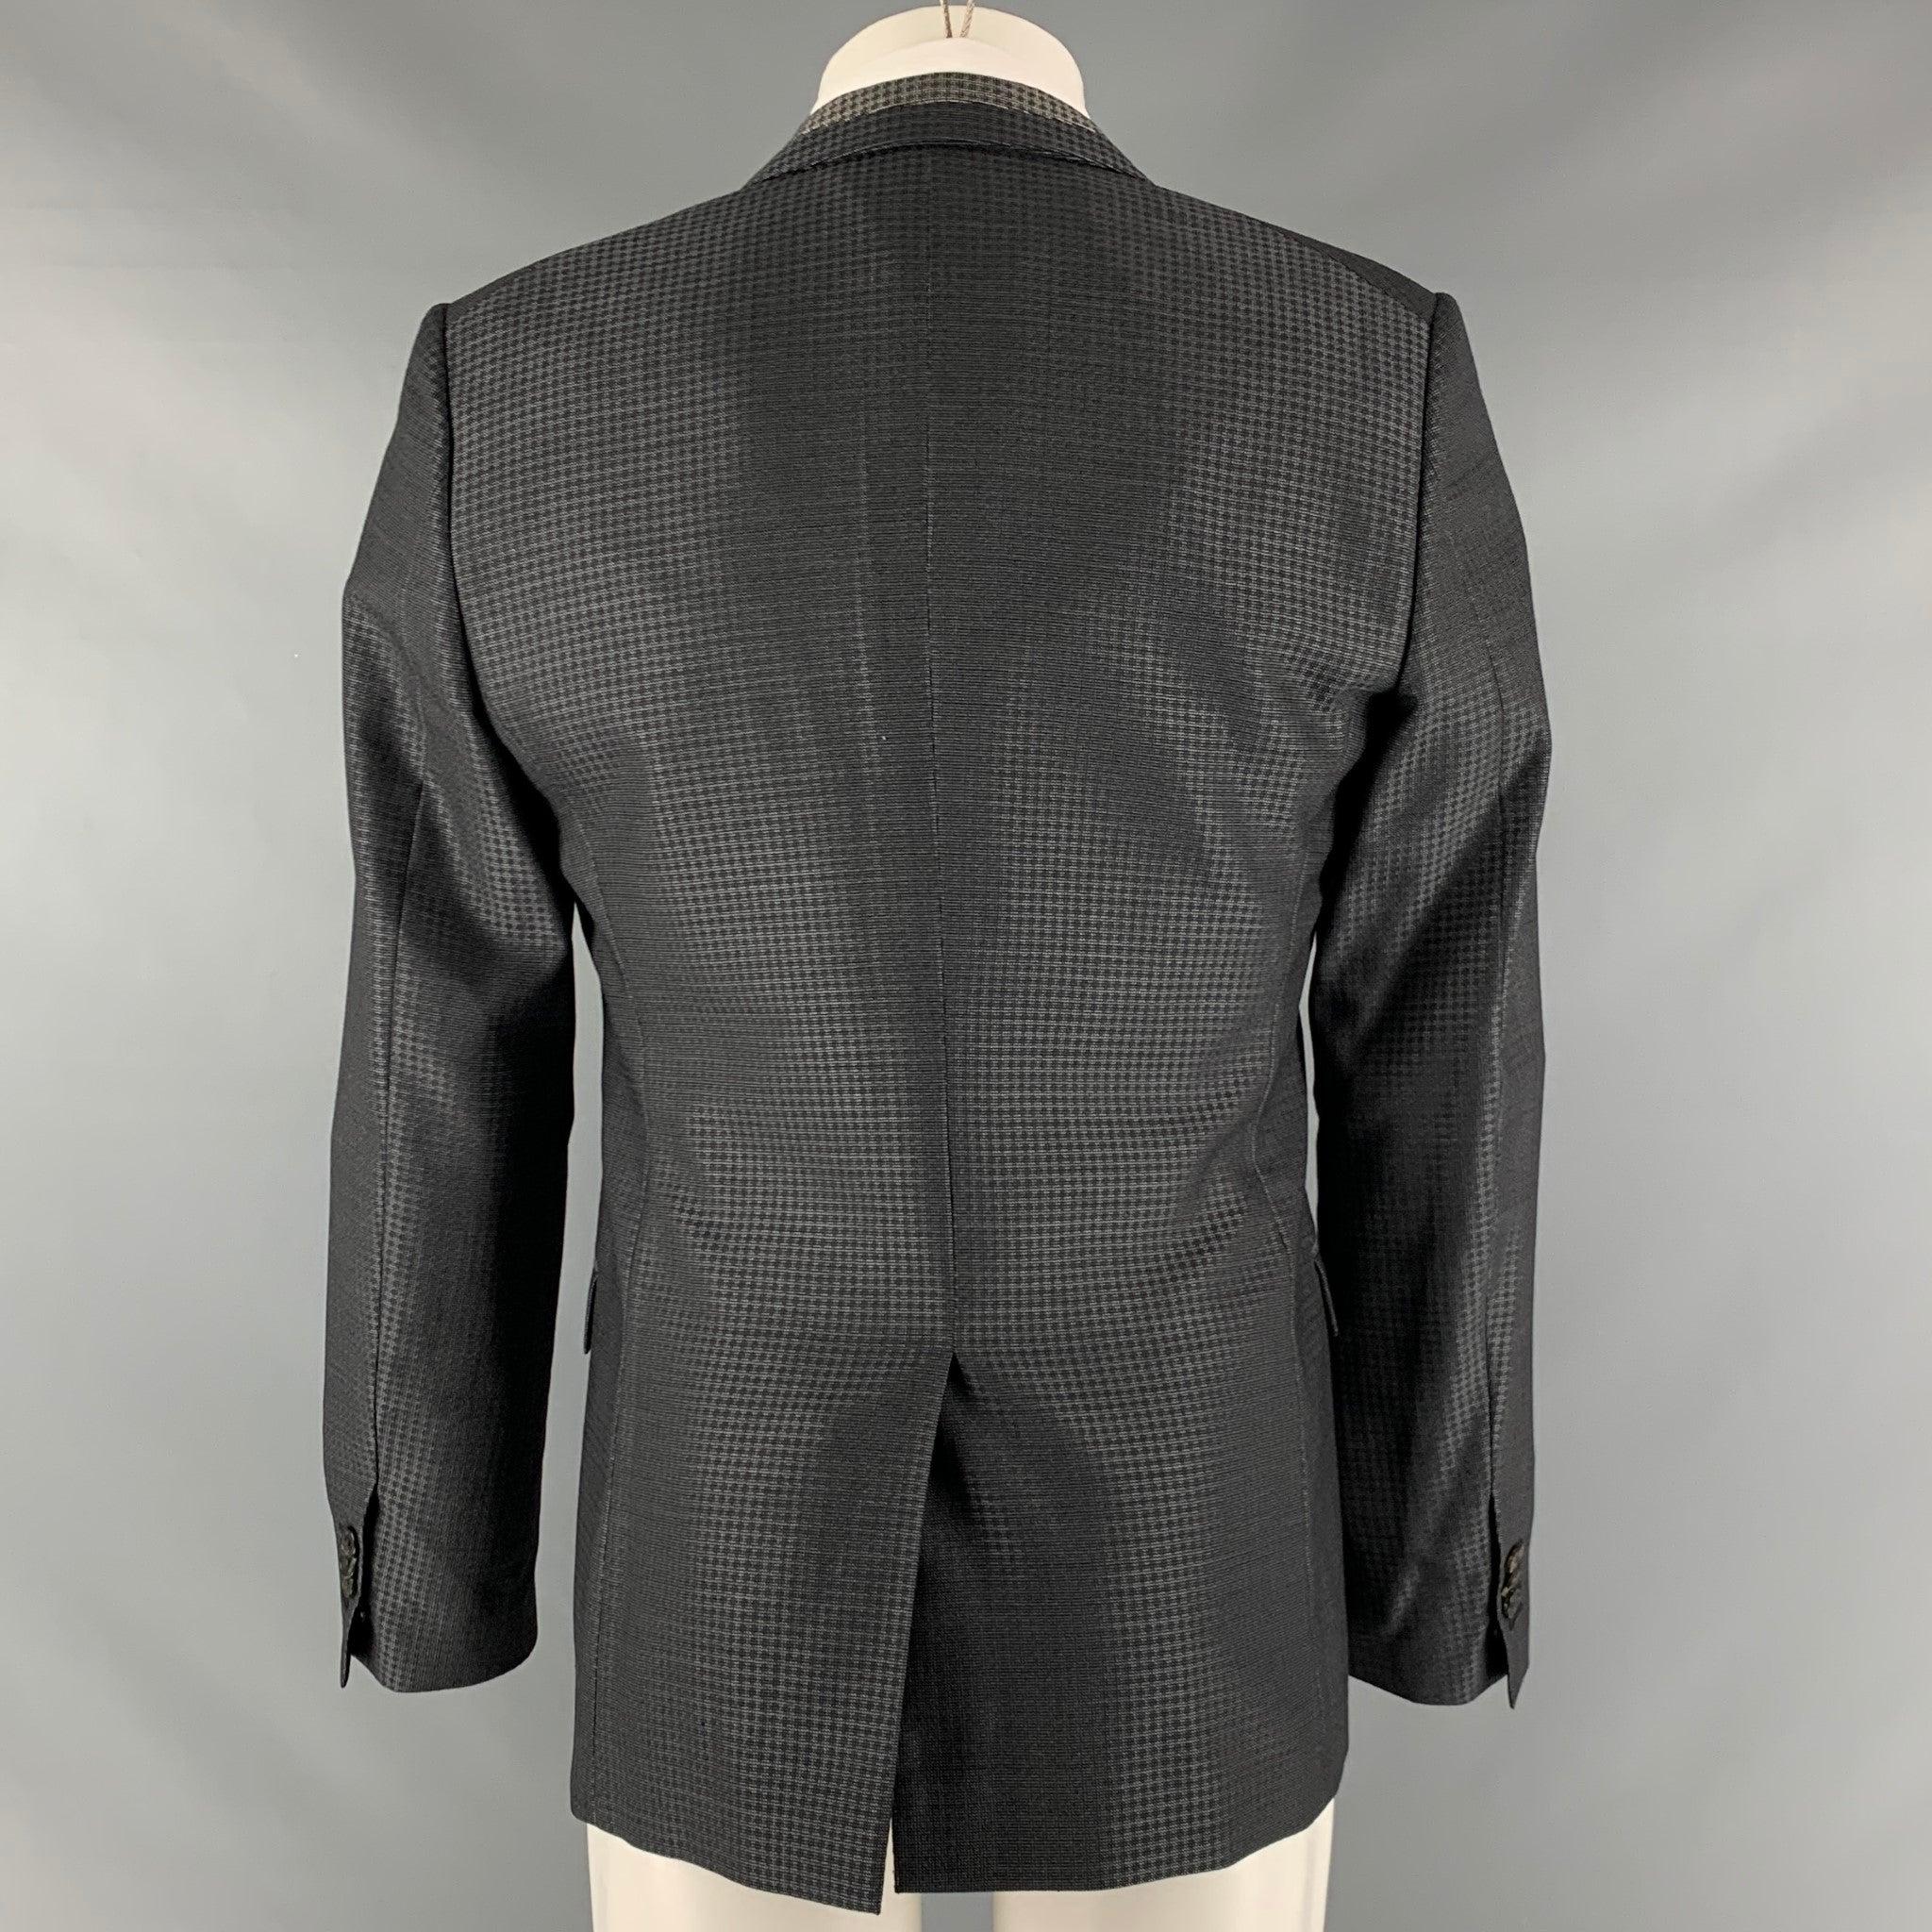 VIKTOR & ROLF Size 38 Grey Black Plaid Wool Silk Notch Lapel Sport Coat In Excellent Condition For Sale In San Francisco, CA